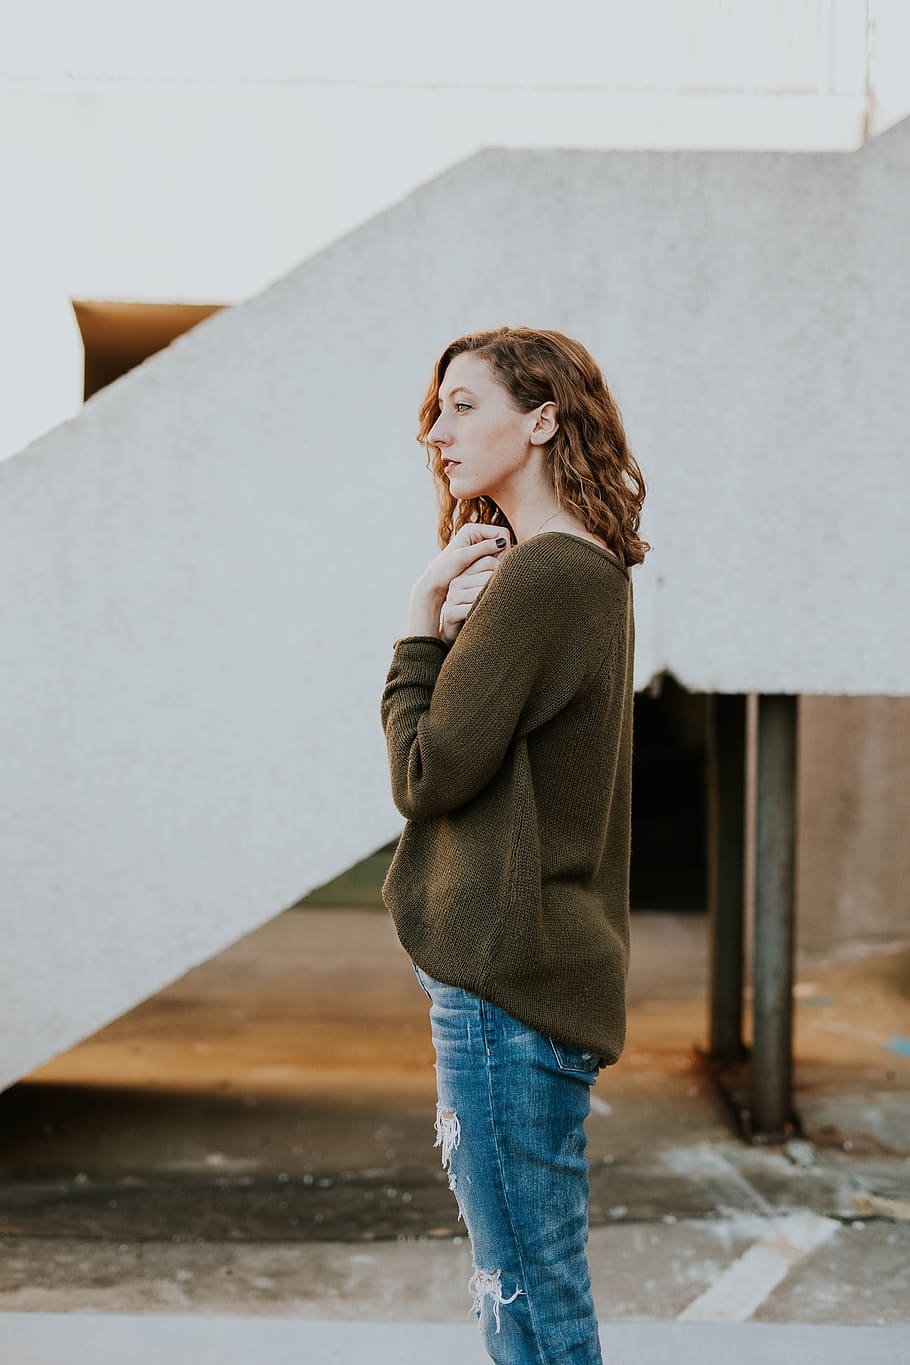 woman wearing brown sweatshirt and whiskered distressed blue jeans, woman standing near white concrete stairway